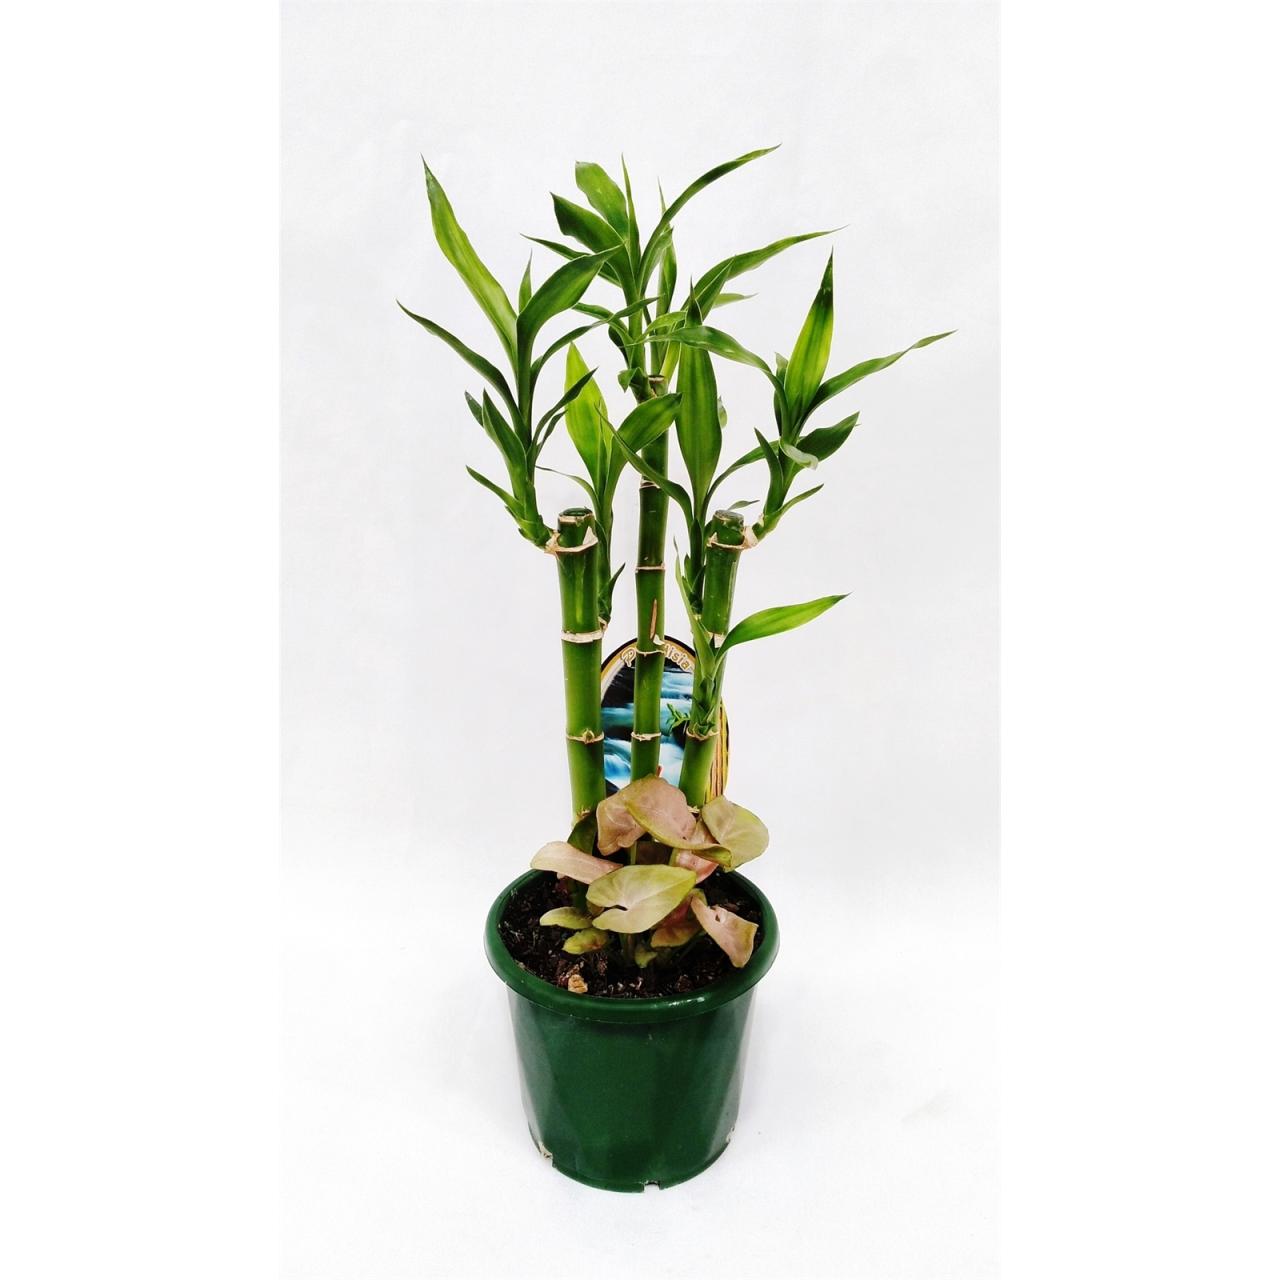 Hanging Plants Indoor | Bamboo Pot Plants from Bunnings: Enhance Your Home with Natural Elegance